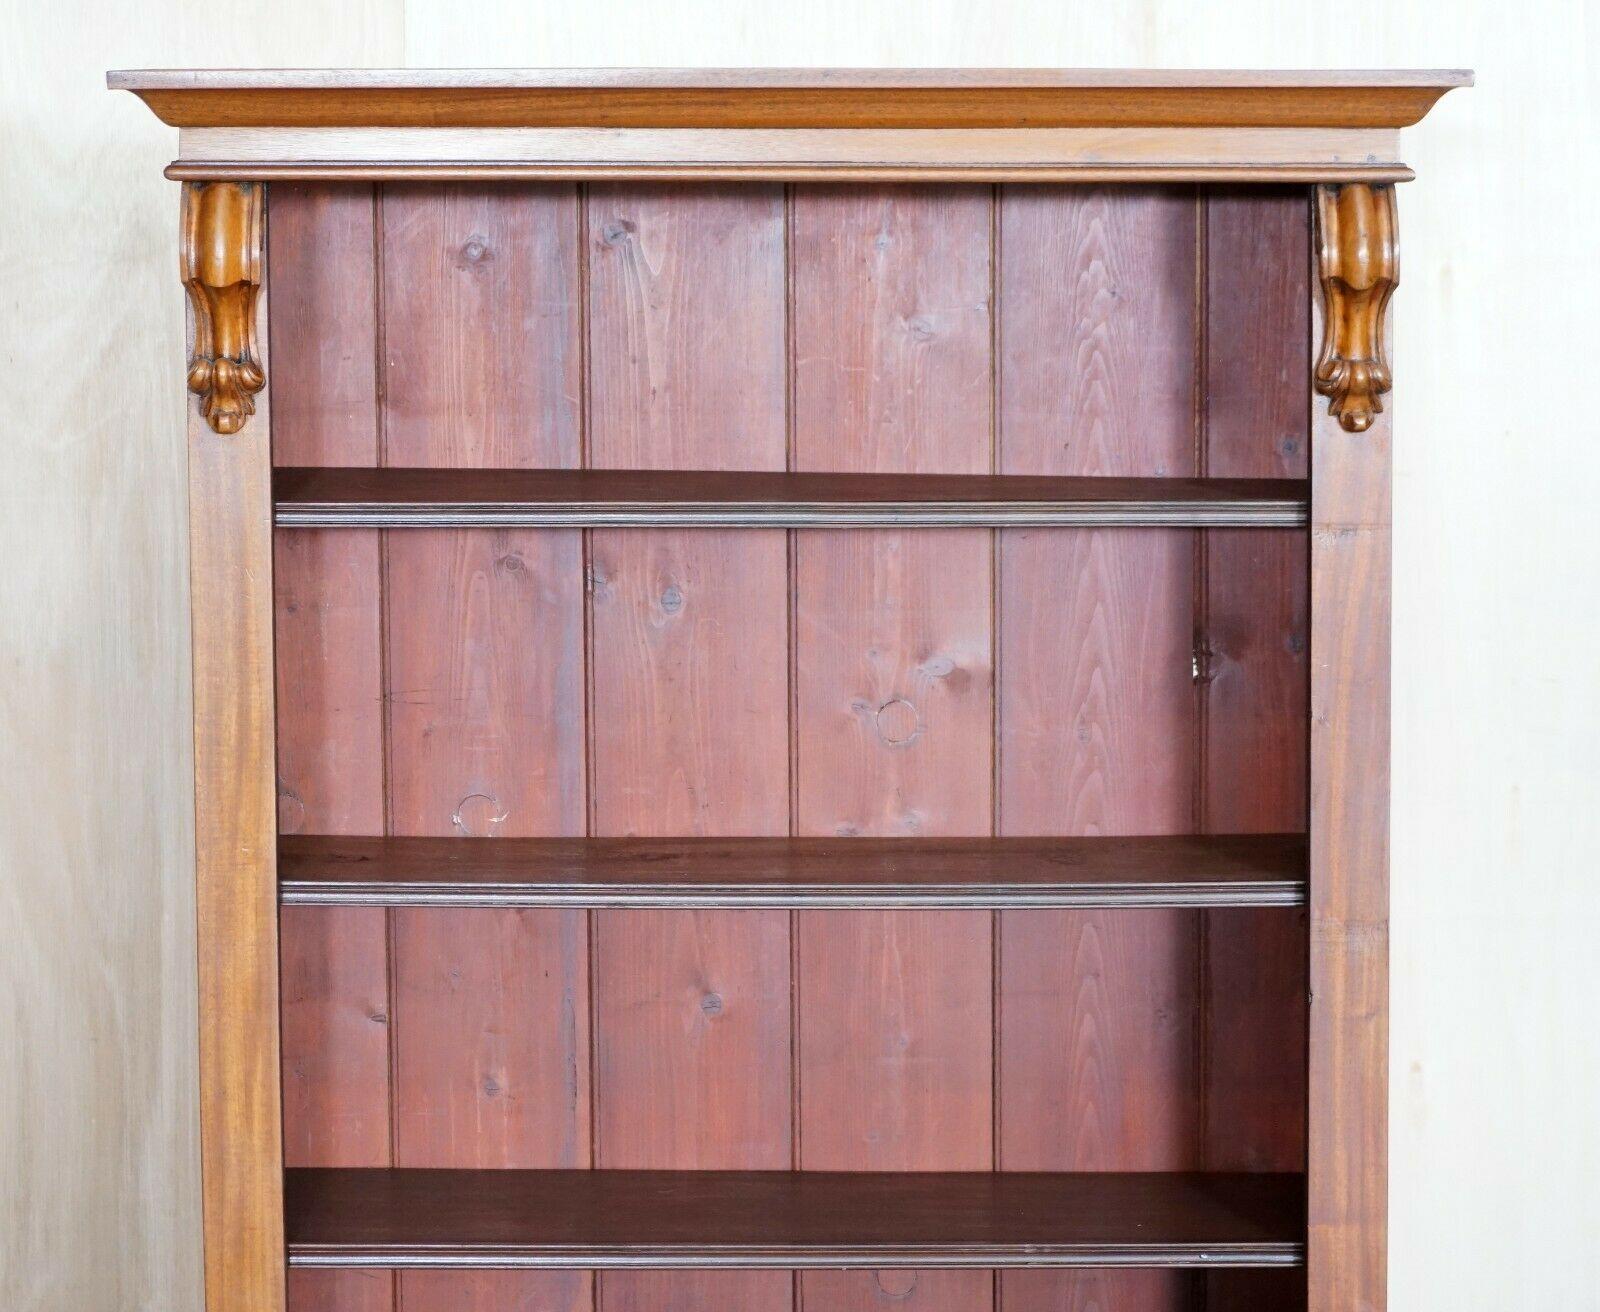 Hand-Crafted PAIR OF ViCTORIAN HARDWOOD TALL OPEN LIBRARY BOOKCASES HEIGHT ADJUSTABLE SHELVES